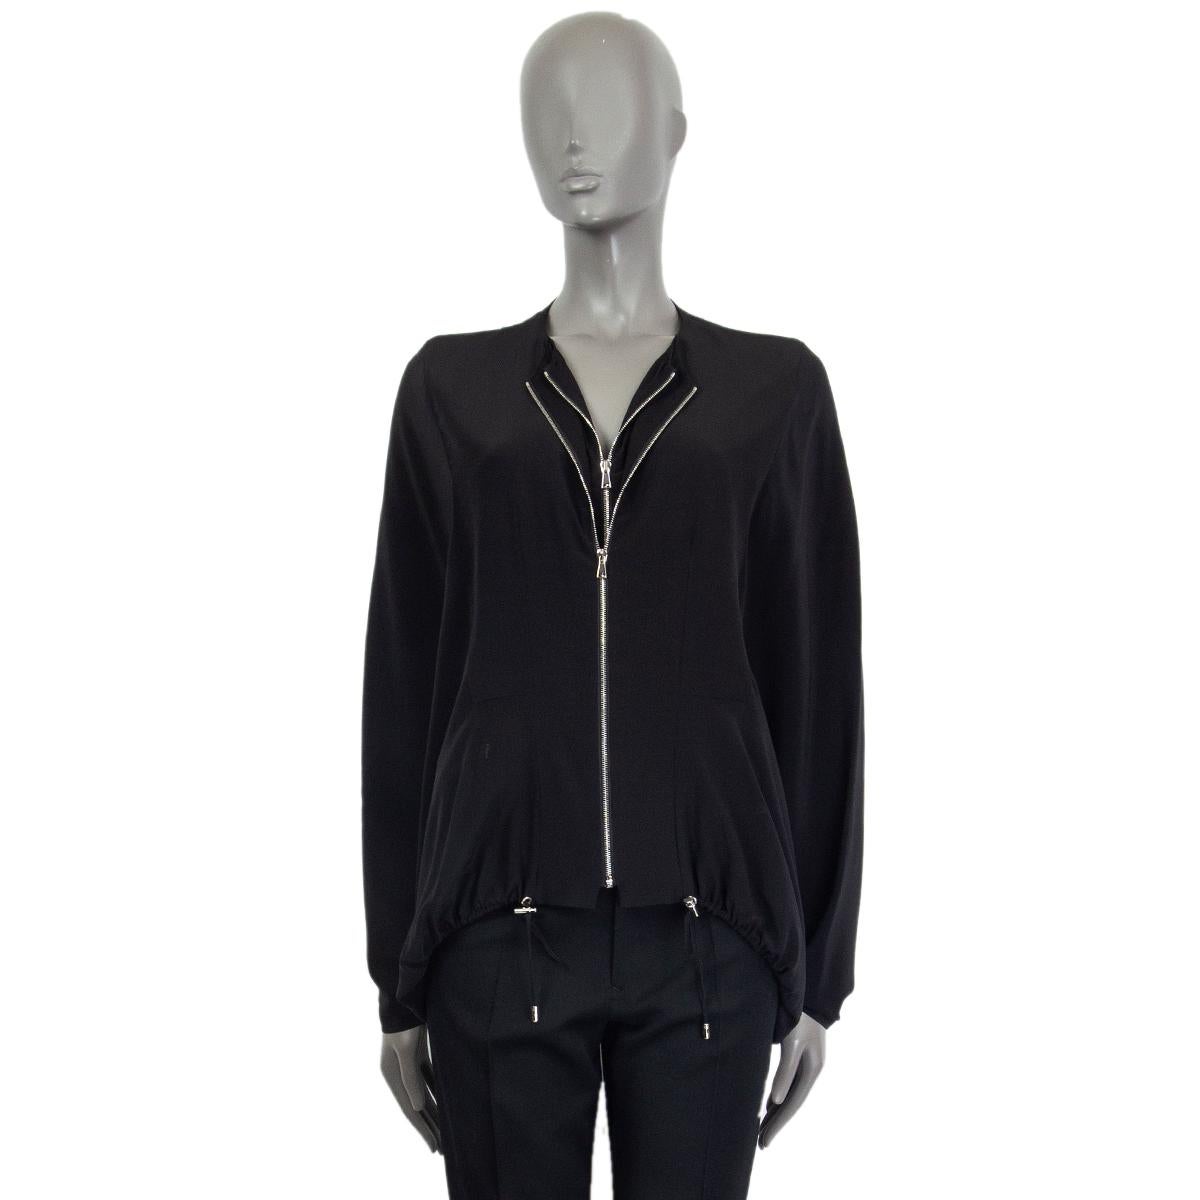 Tom Ford oversized poncho blouson jacket in black silk (100%) with double zipper detail and drawstring around hips. Brand new. 

Tag Size 36
Size XXS
Shoulder Width 36cm (14in)
Bust To 68cm (26.5in)
Waist To 68cm (26.5in)
Hips To 68cm